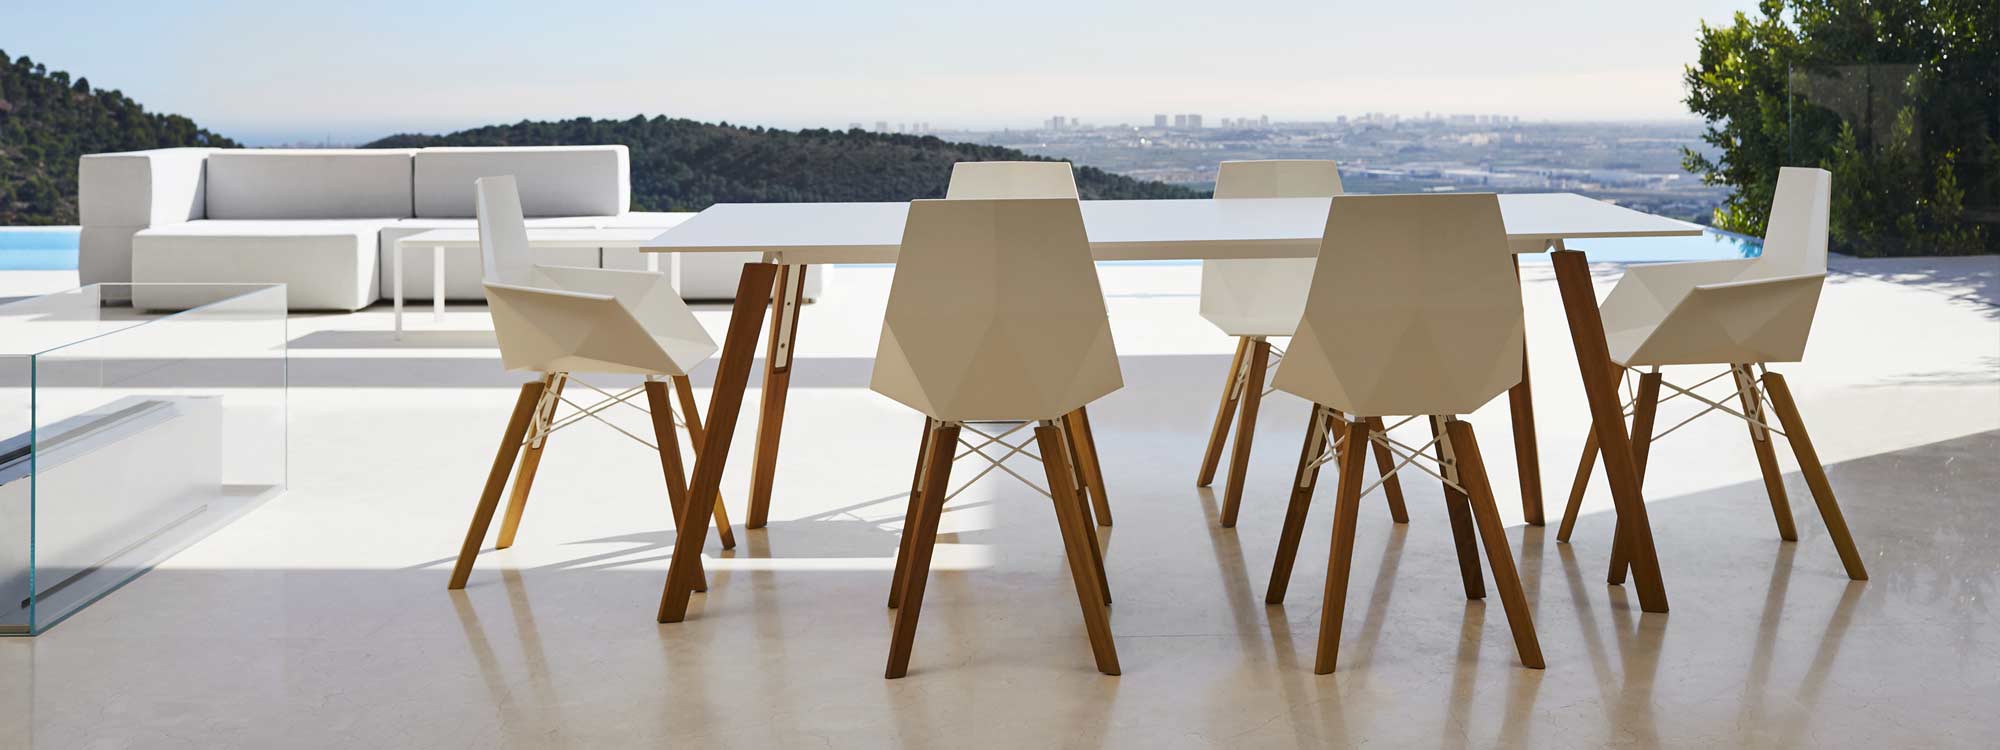 Image of Vondom Faz Wood modern dining set on minimalist terrace with cityscape in the background